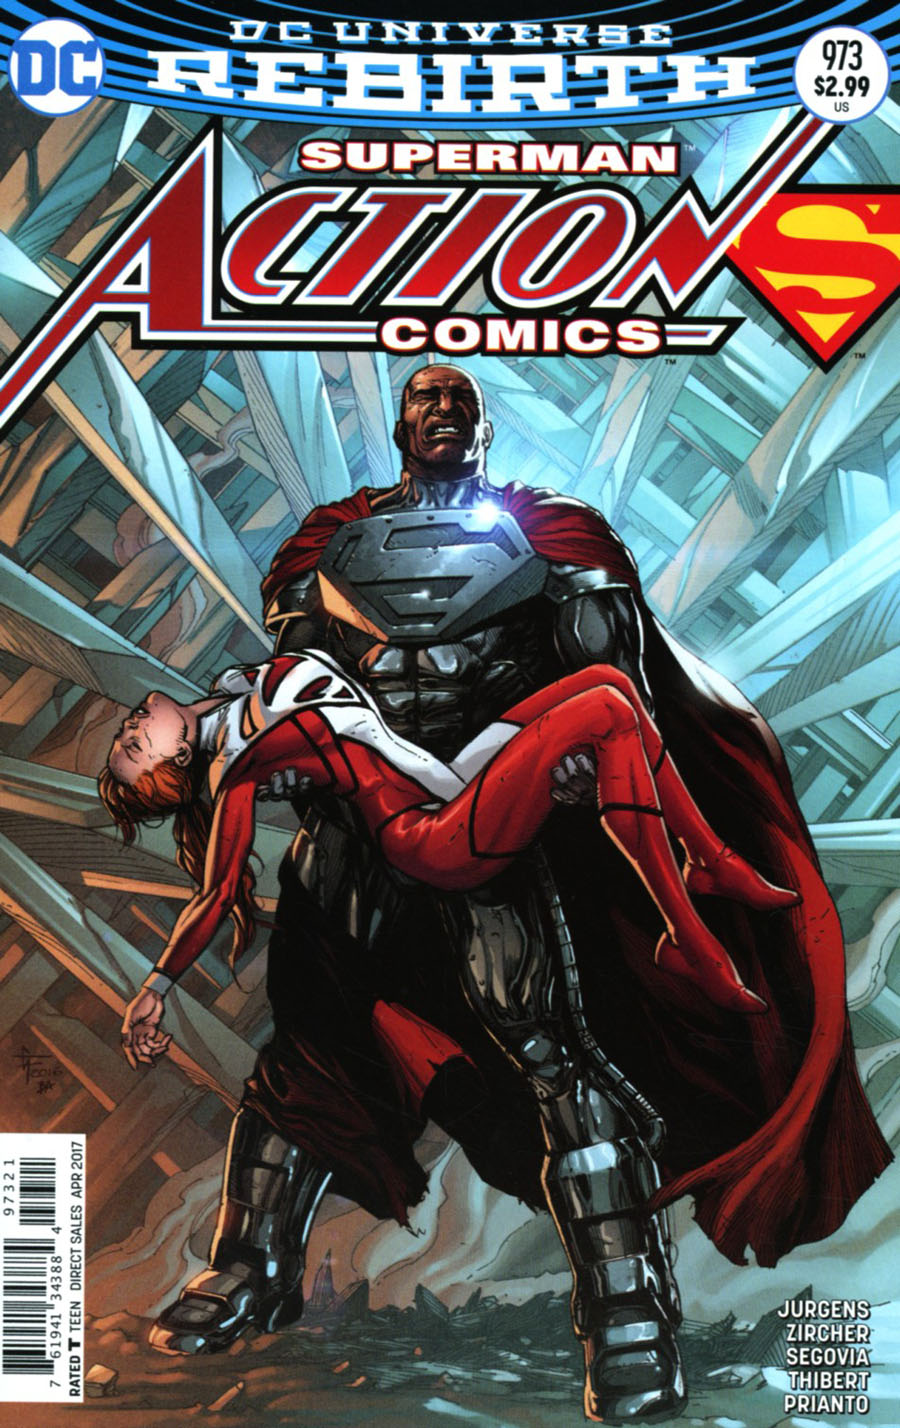 Action Comics Vol 2 #973 Cover B Variant Gary Frank Cover